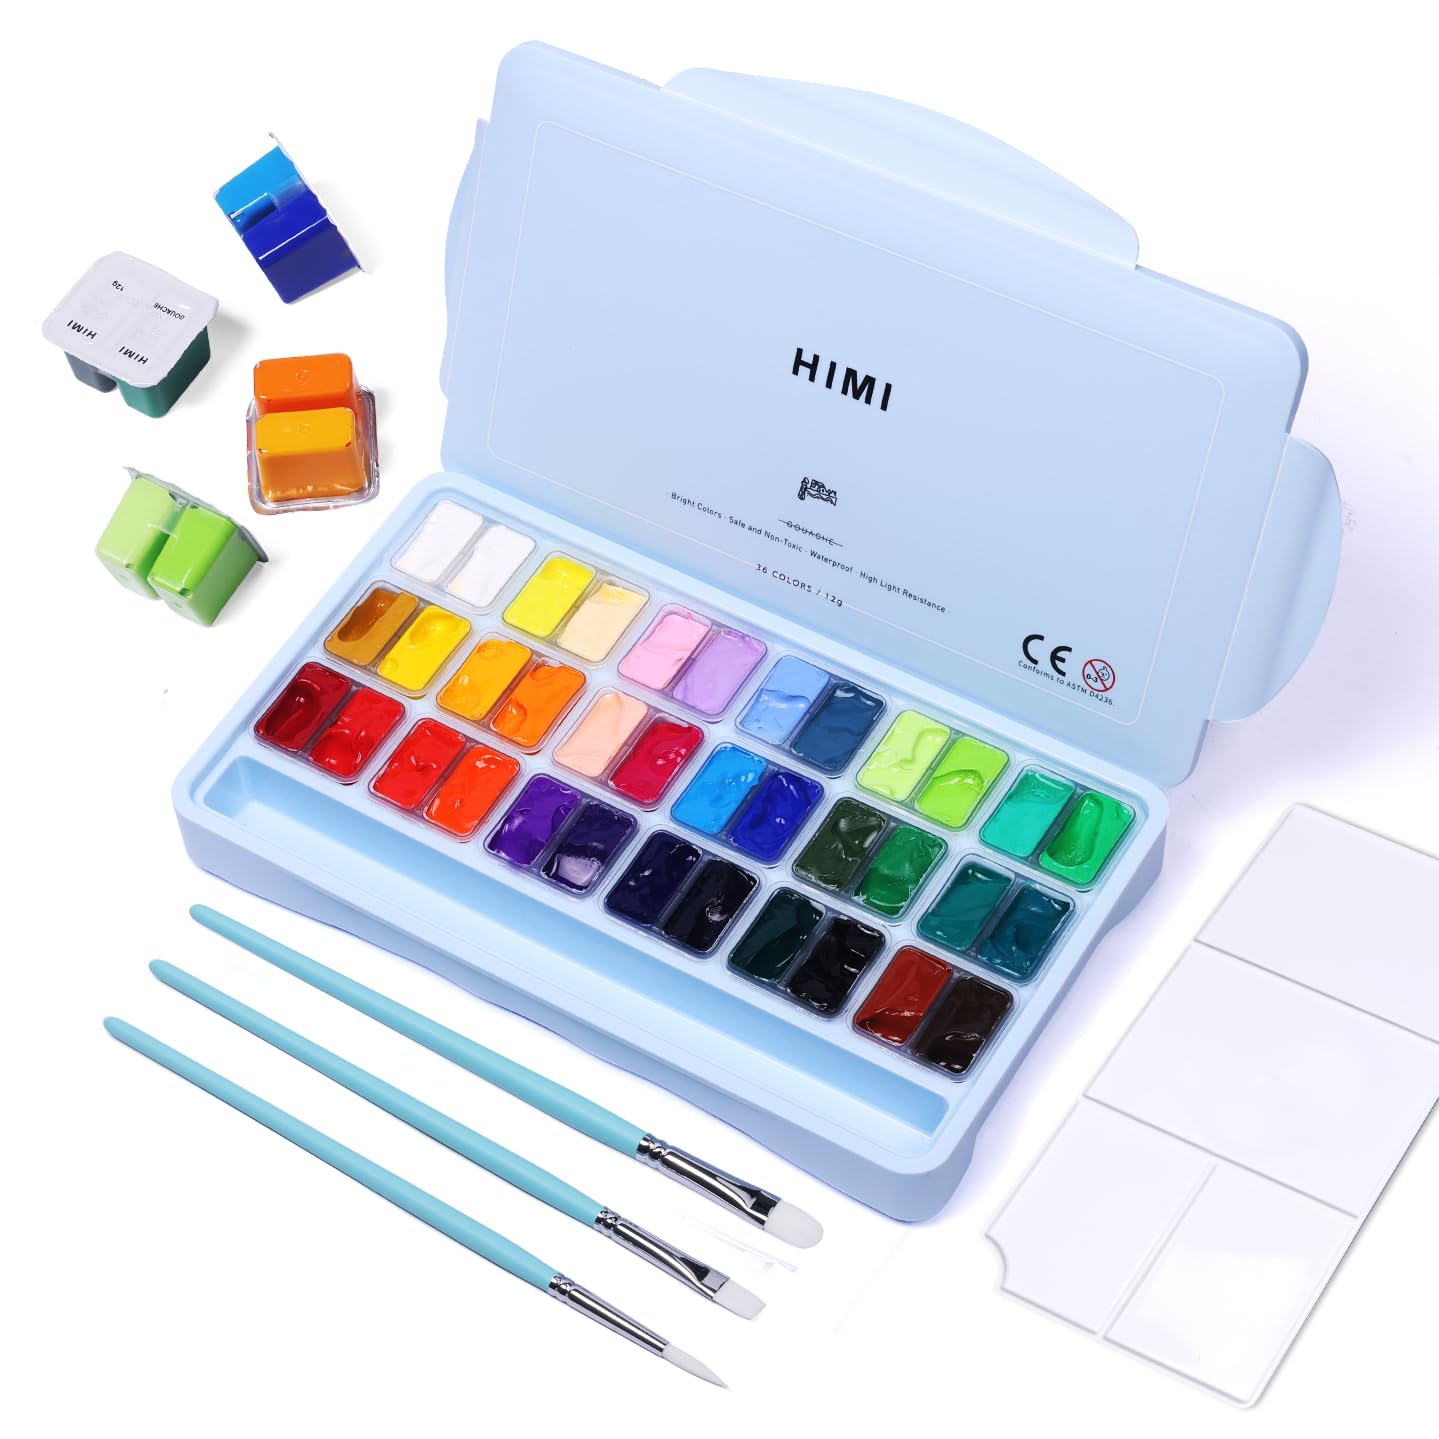 HIMI Gouache Paint Set 24 Colors x 30ml Unique Jelly Cup Design with 3  Paint Brushes and a Palette in a Carrying Case Perfect for Artists Students  Gouache Opaque Watercolor Painting (Green)